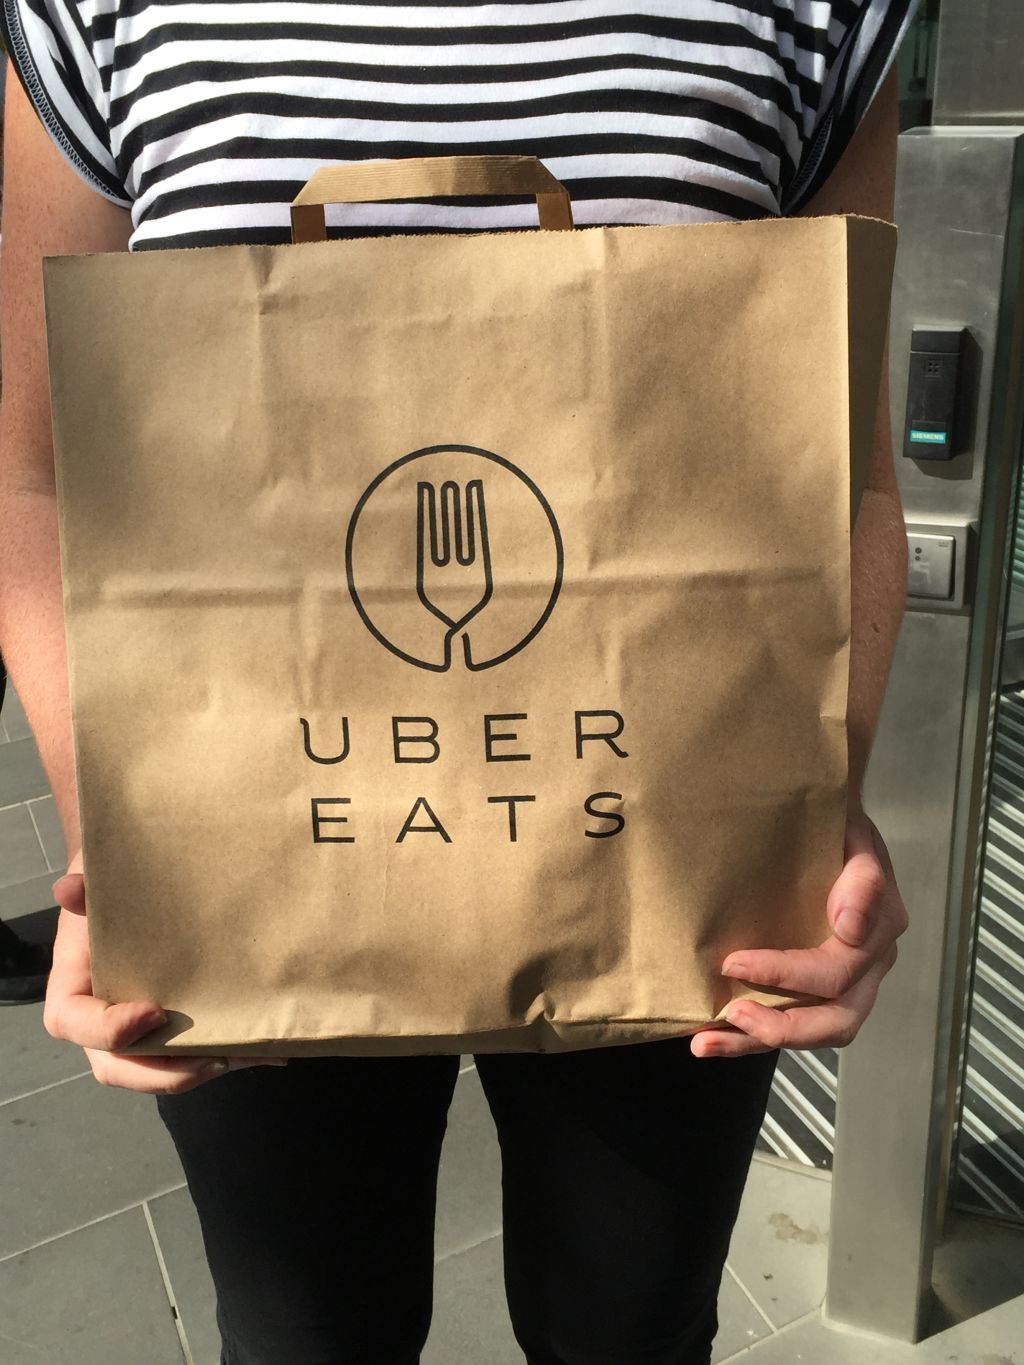 A growing number of companies are offering services to those stuck in self-isolation, including food delivery companies Deliveroo and Uber Eats.  Photo: iStock